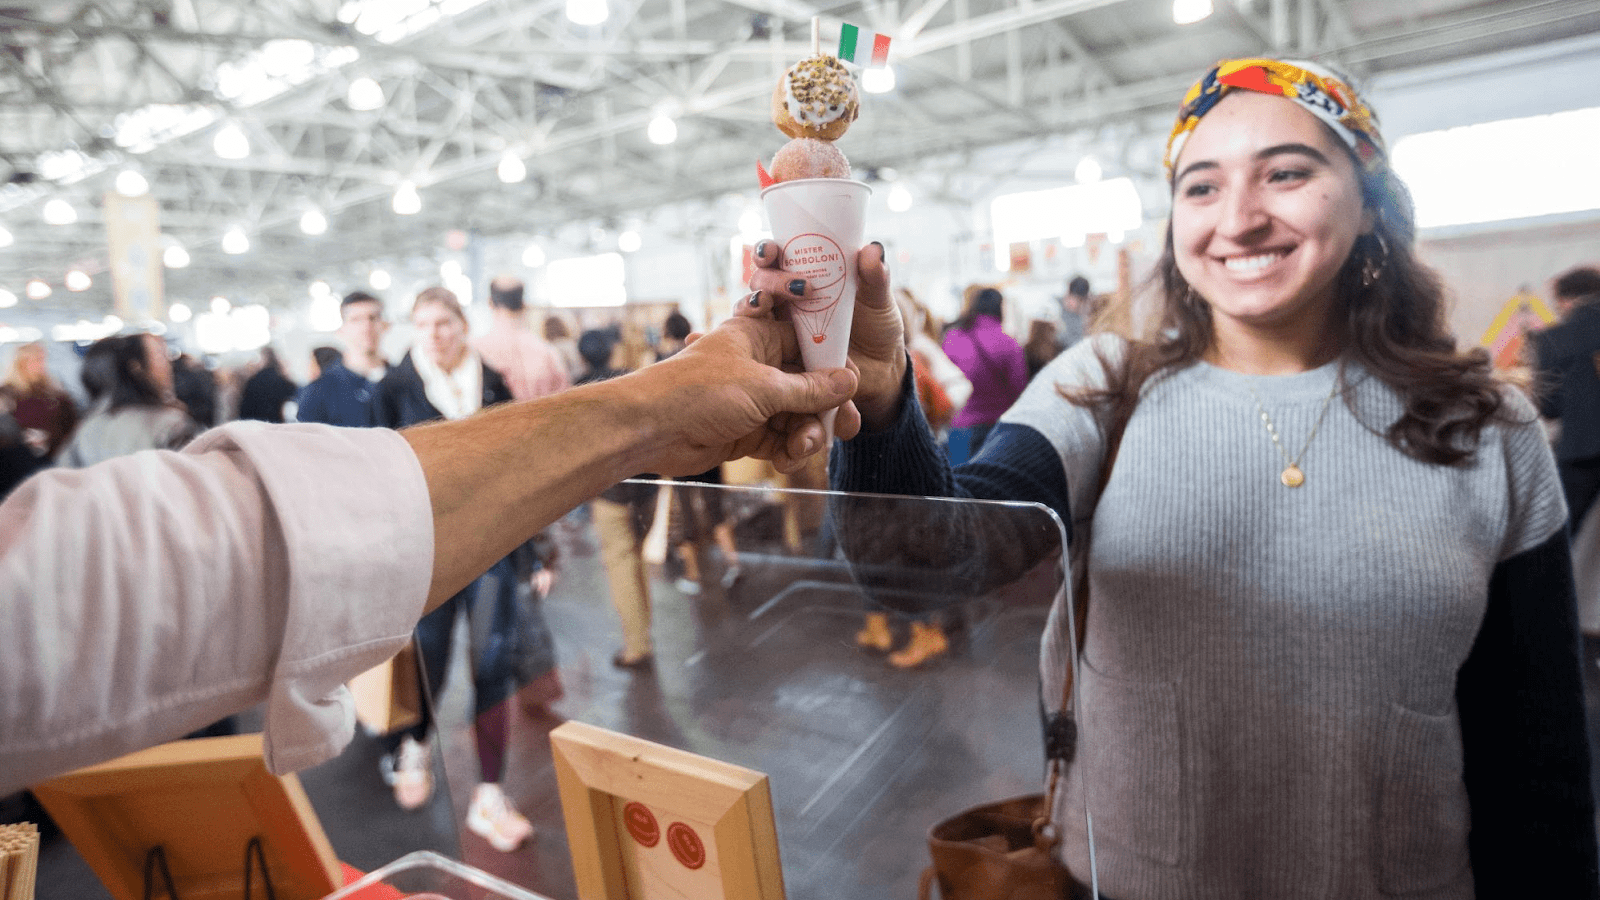 Woman buying ice cream at event